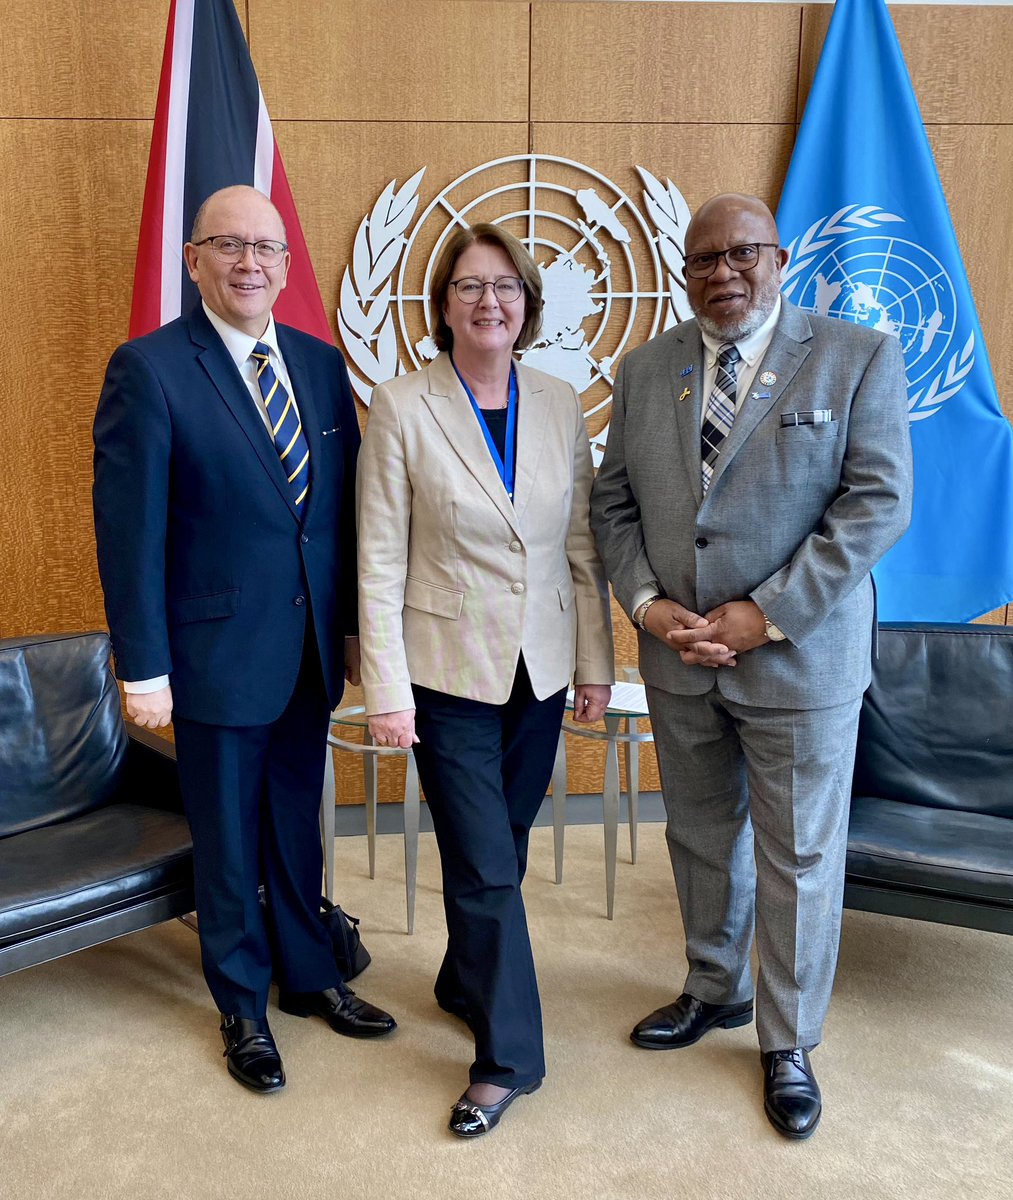 Had a productive meeting with Amb. @GermanAmbUN_NY 🇩🇪 and Amb. @NevilleGertze 🇳🇦, co-facilitators for the #SummitOfTheFuture Exchanged views on the negotiation process on the Pact and the way forward. It is this multilateral effort that we need for a brighter future. #SotF